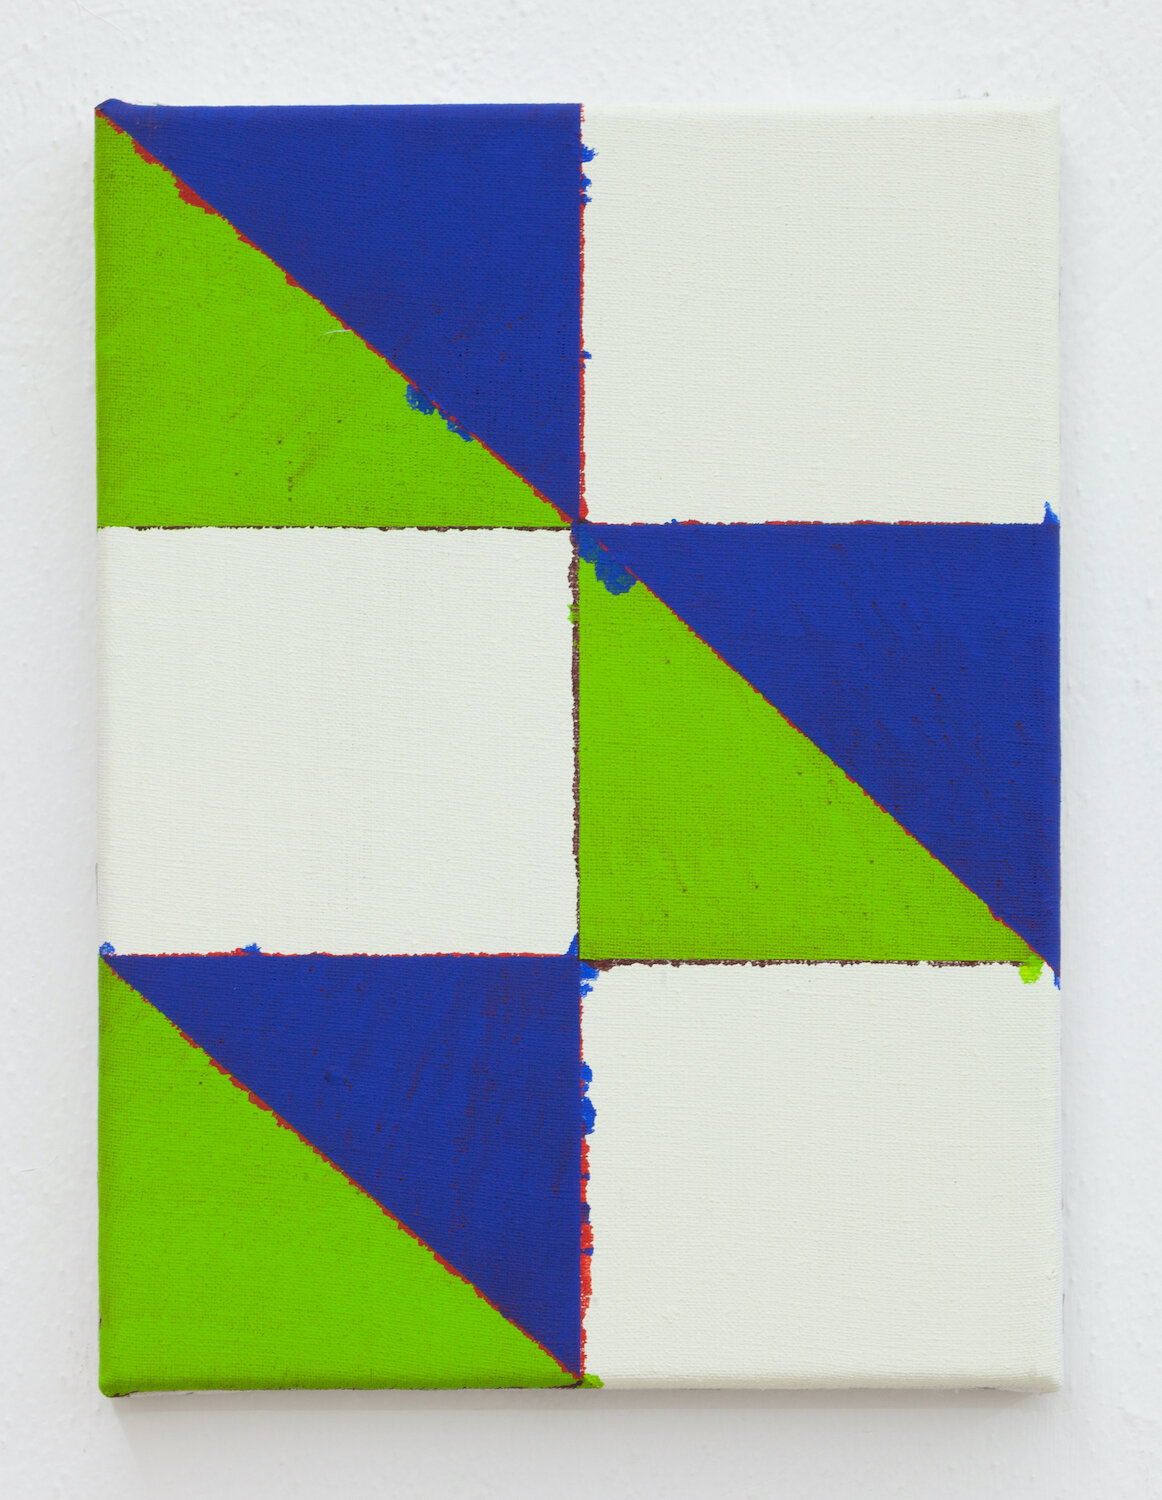  Joshua Abelow,  Untitled (Abstraction “HHH”) , 2019, Oil on linen, 12 x 9 inches 